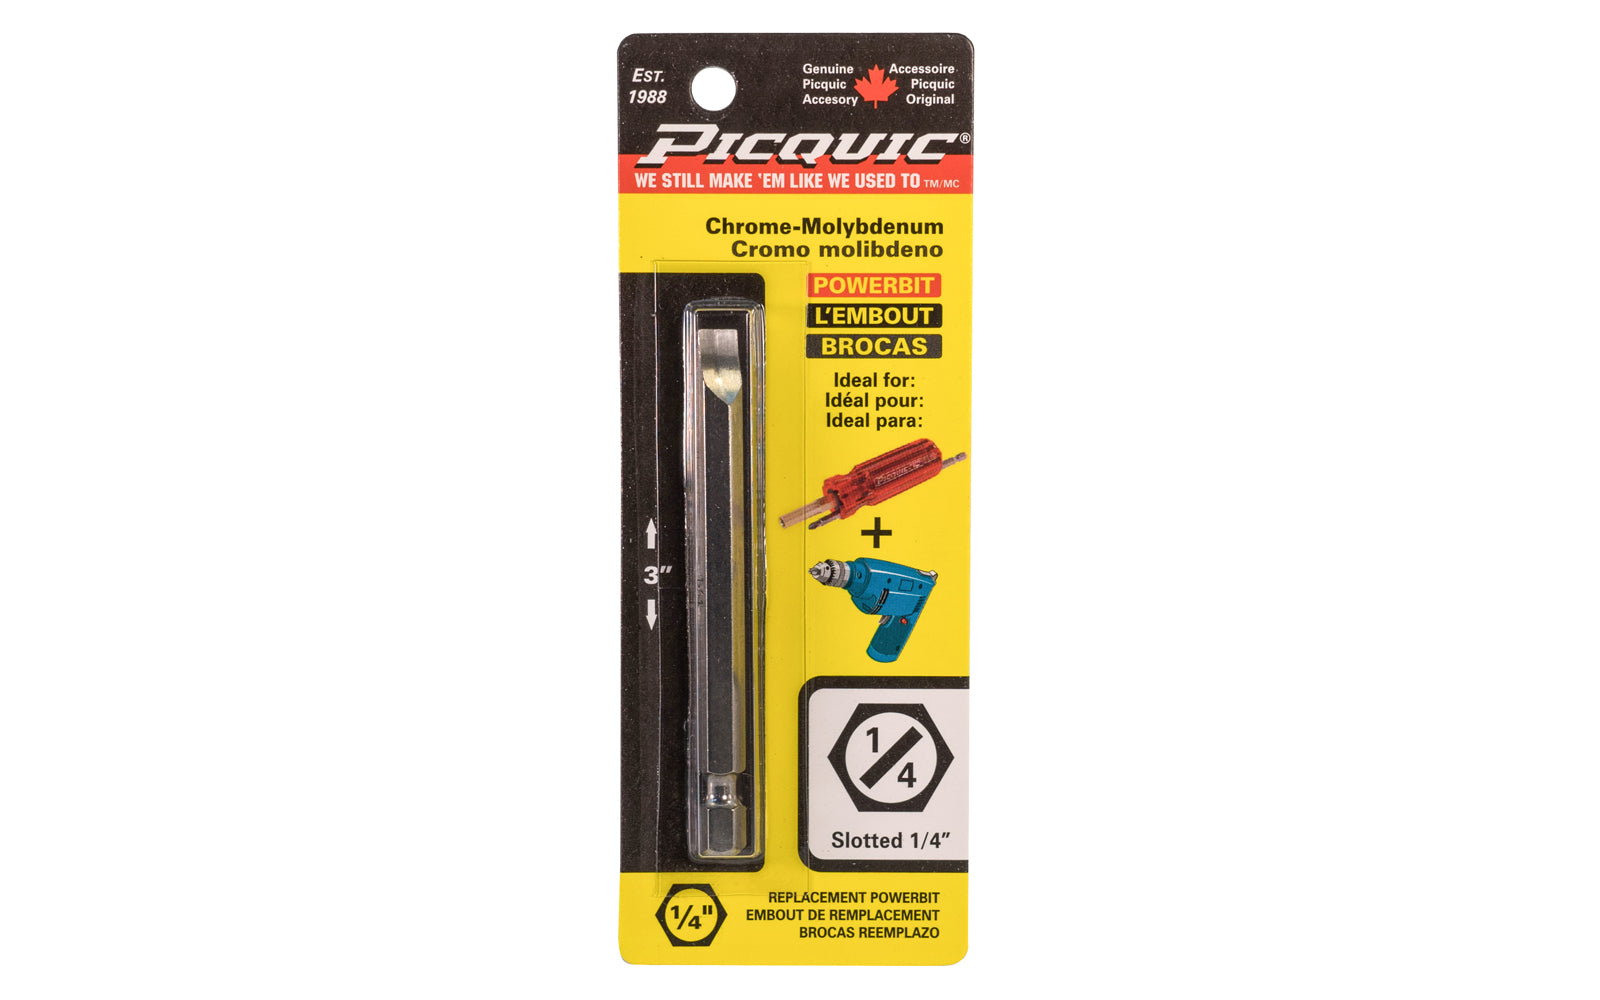 Picquic 3" length powerbit -1/4" Slot Bit. 1/4" hex shank power bits ideal for use in drills & impact drivers. Model 88114.